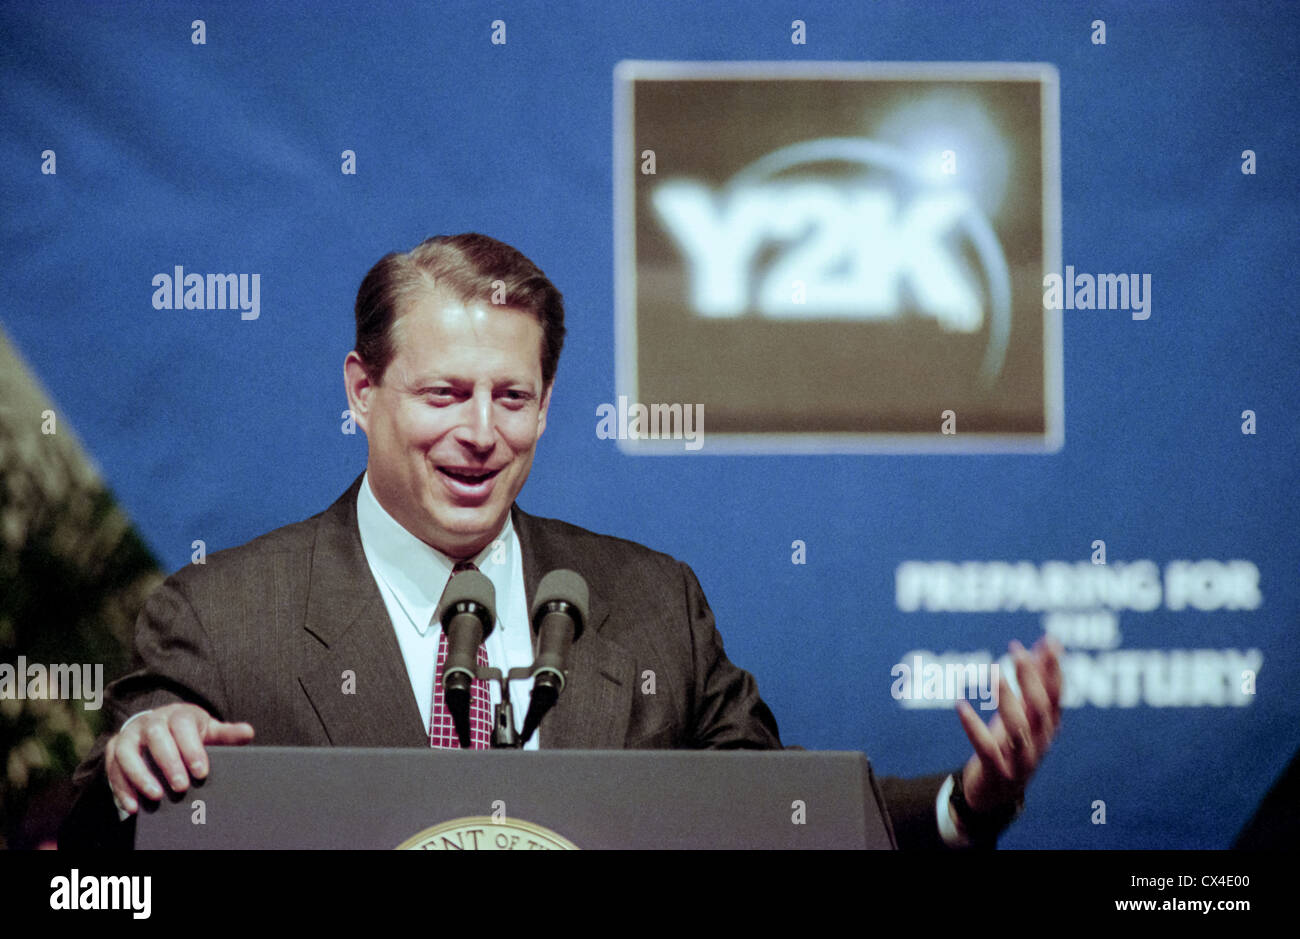 Vice President Al Gore discusses the computer glitch known as the Year 2000 problem or by it's acronym 'Y2K' during a speech at the National Academy of Science July 14, 1998 in Washington, DC. The glitch involves the failure of computer software to recognize the year 2000 and can potentially cause massive problems in government and industry. Stock Photo